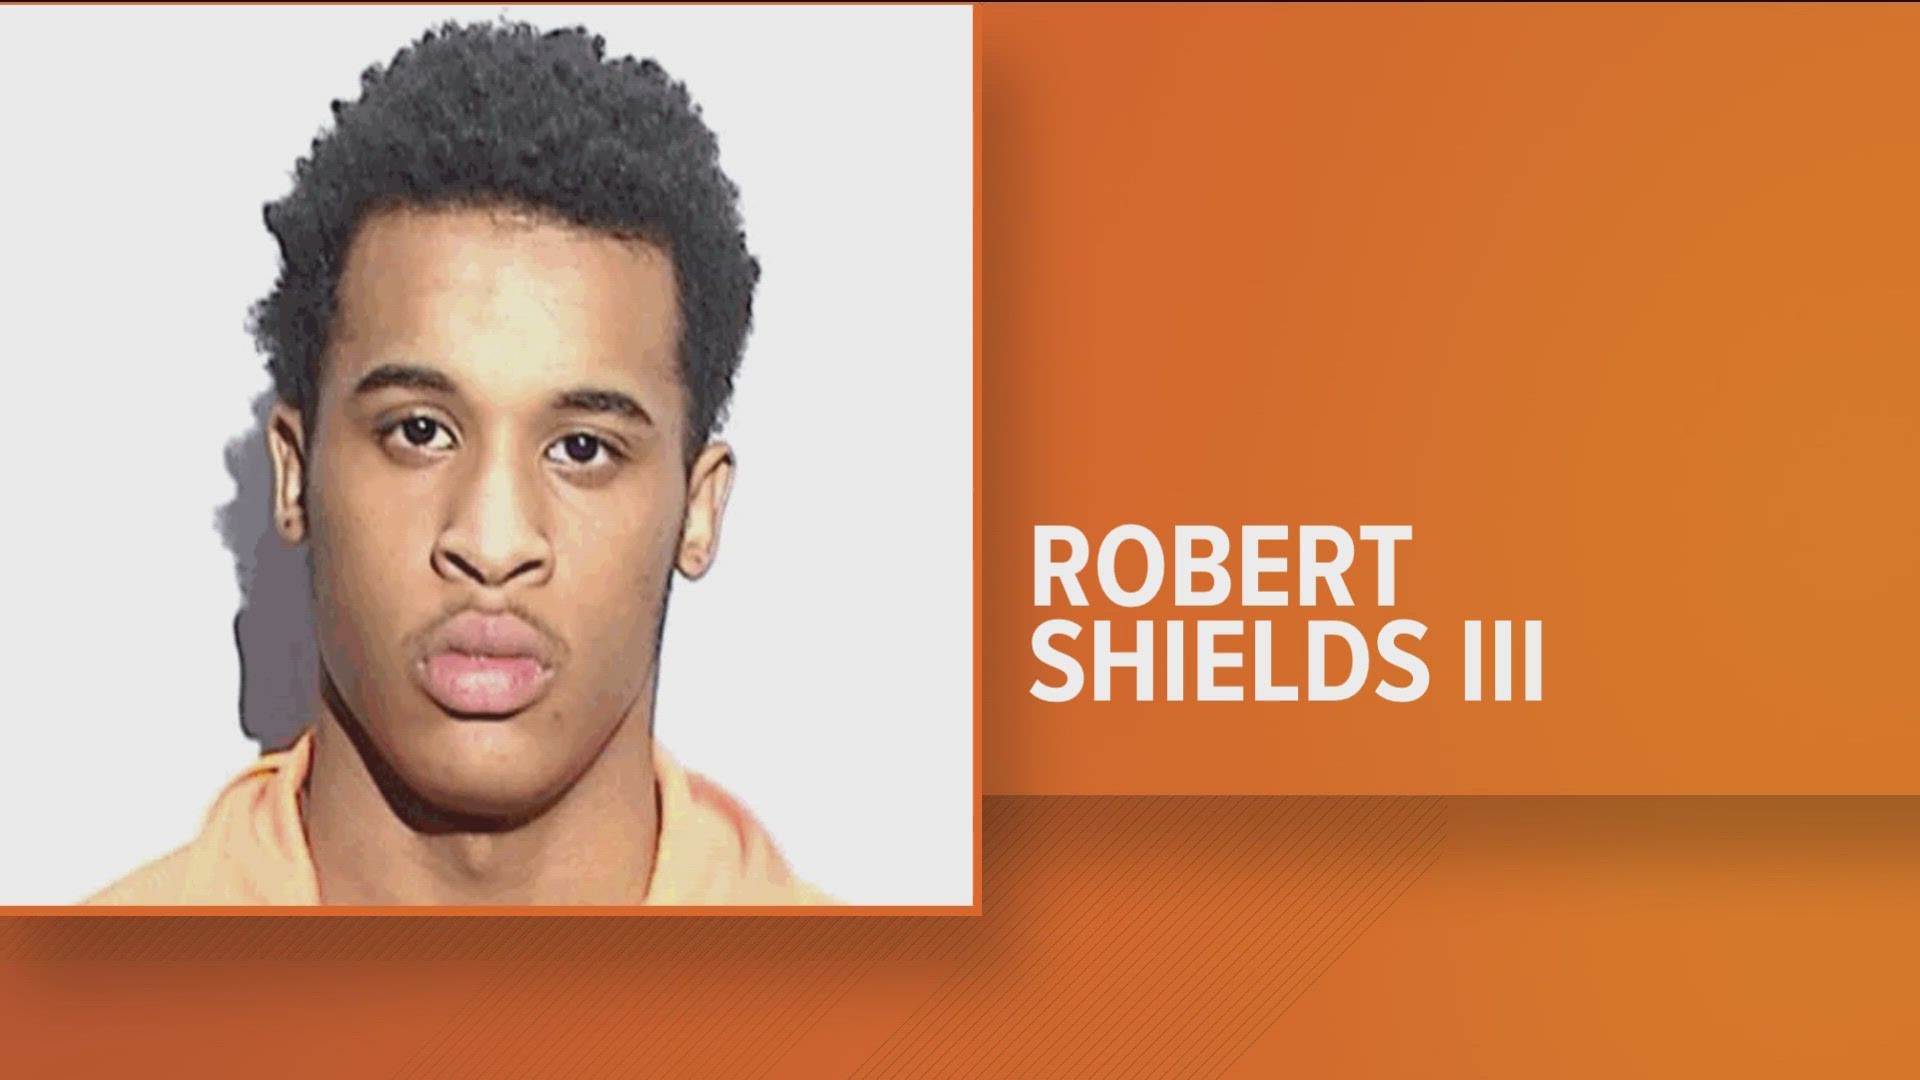 A judge set Robert Shields III's bond at $1 million during an arraignment. Shields is accused of shooting and killing 15-year-old Jaylah Perry.